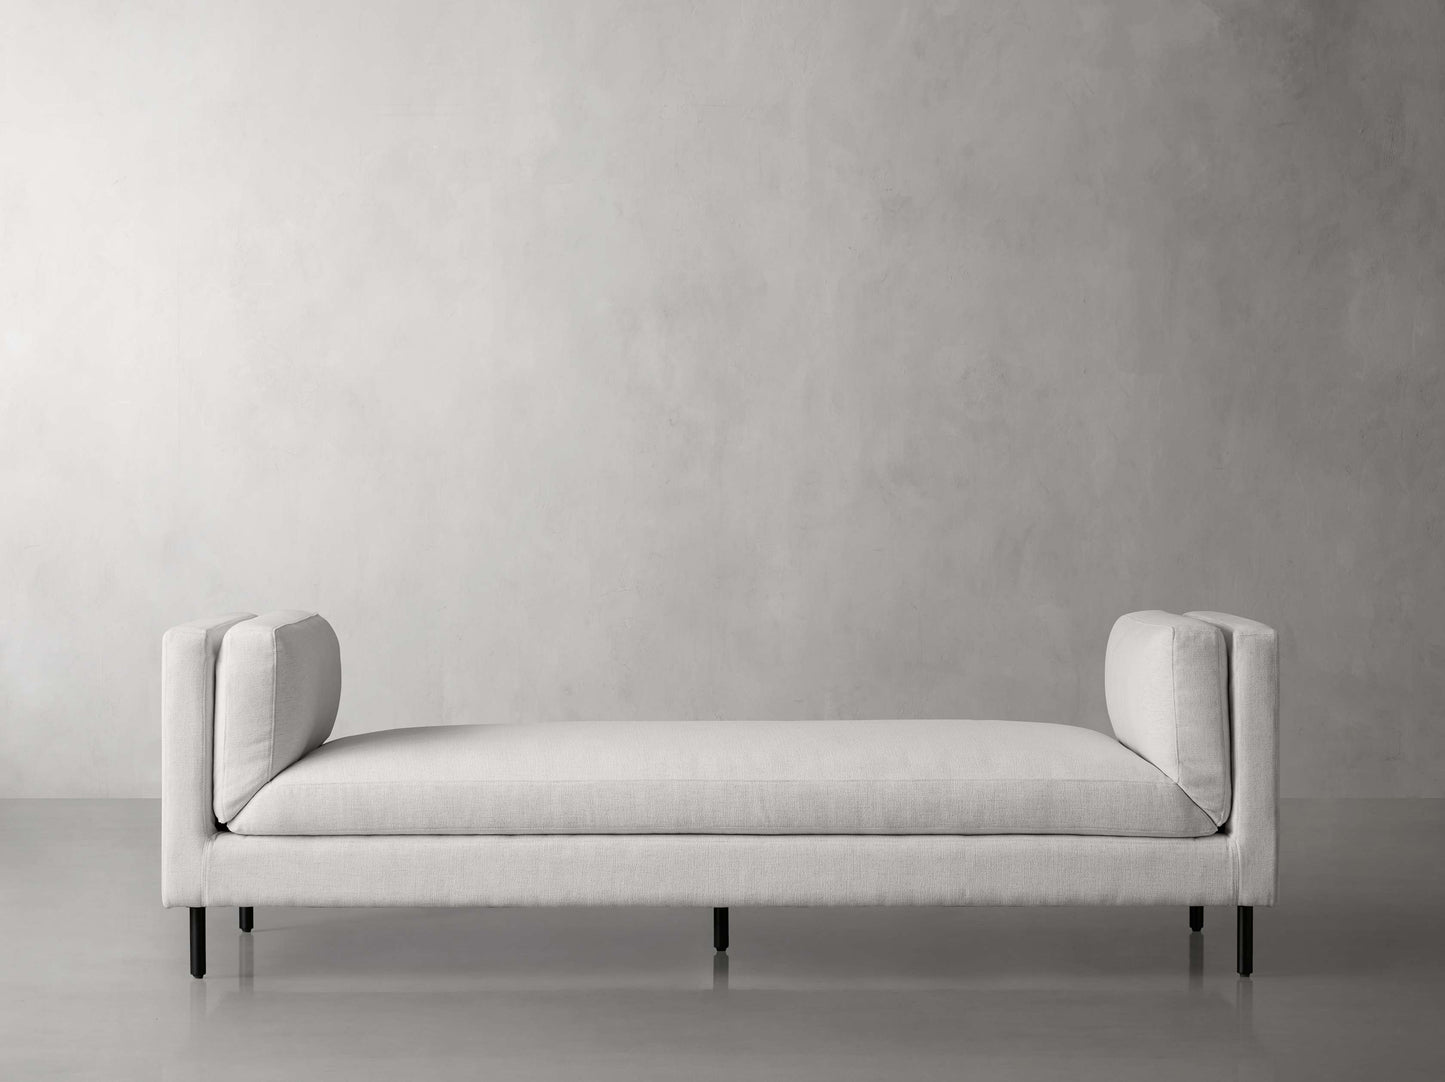 73" Malta Daybed by Arhaus (in Nomad Snow)